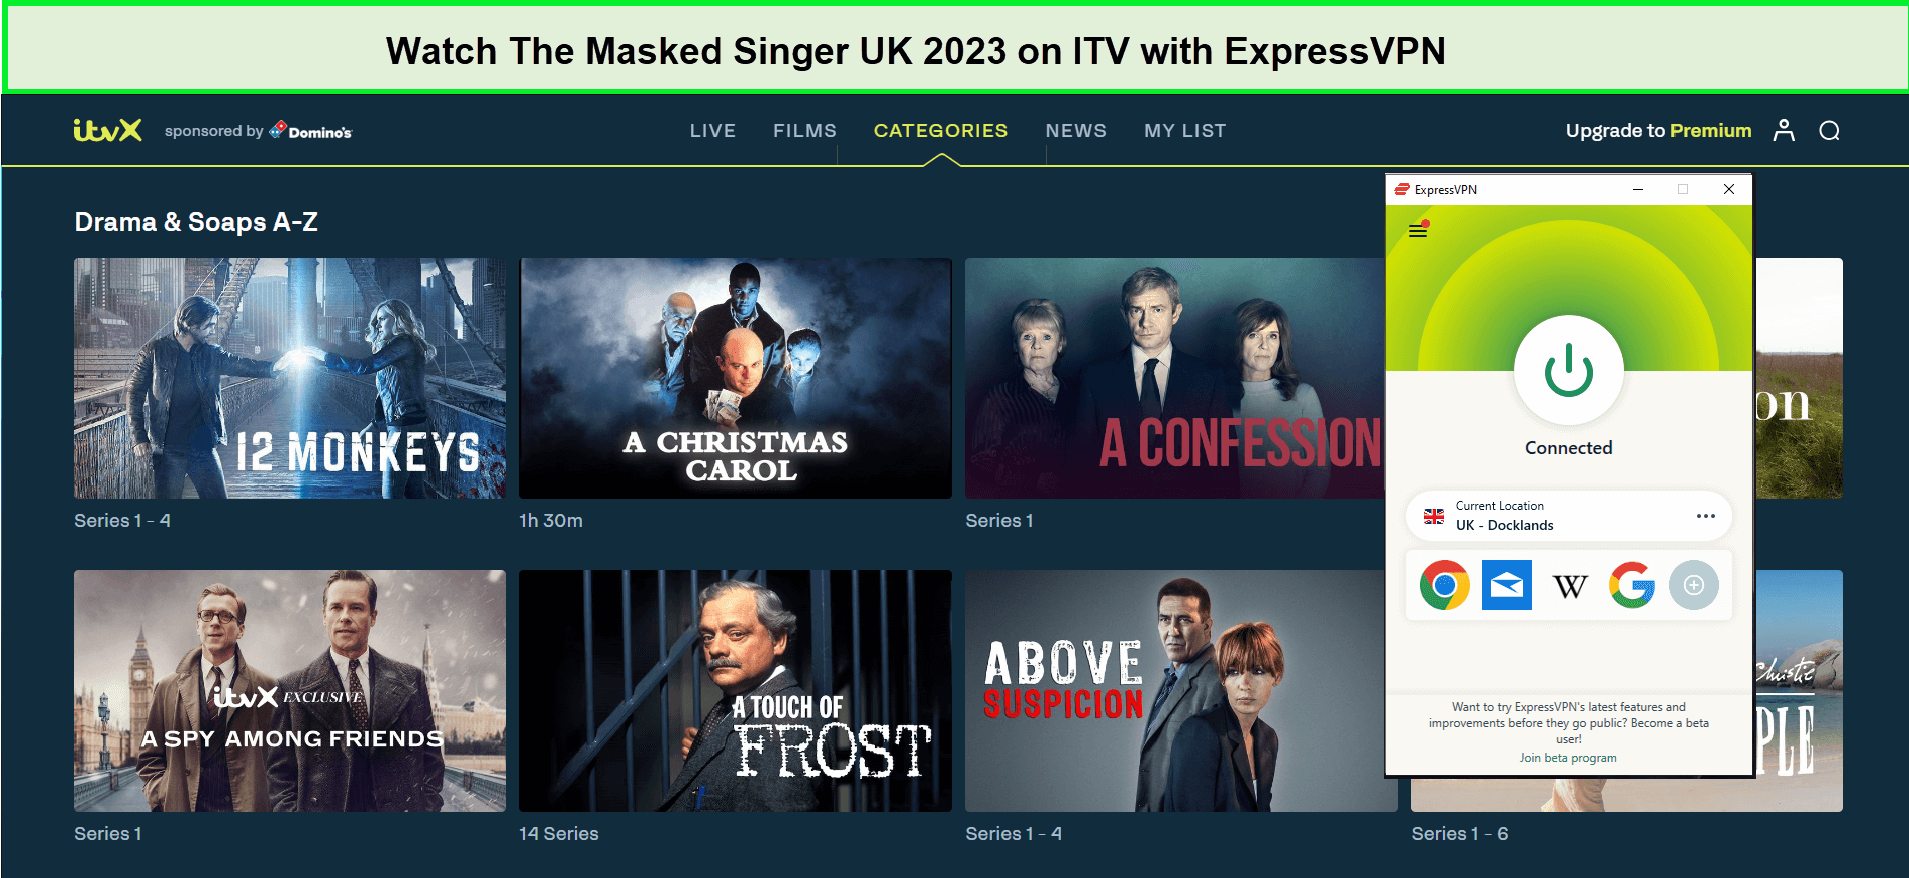 Watch-The-Masked-Singer-UK-2023-in-Spain-on-ITV-with-ExpressVPN